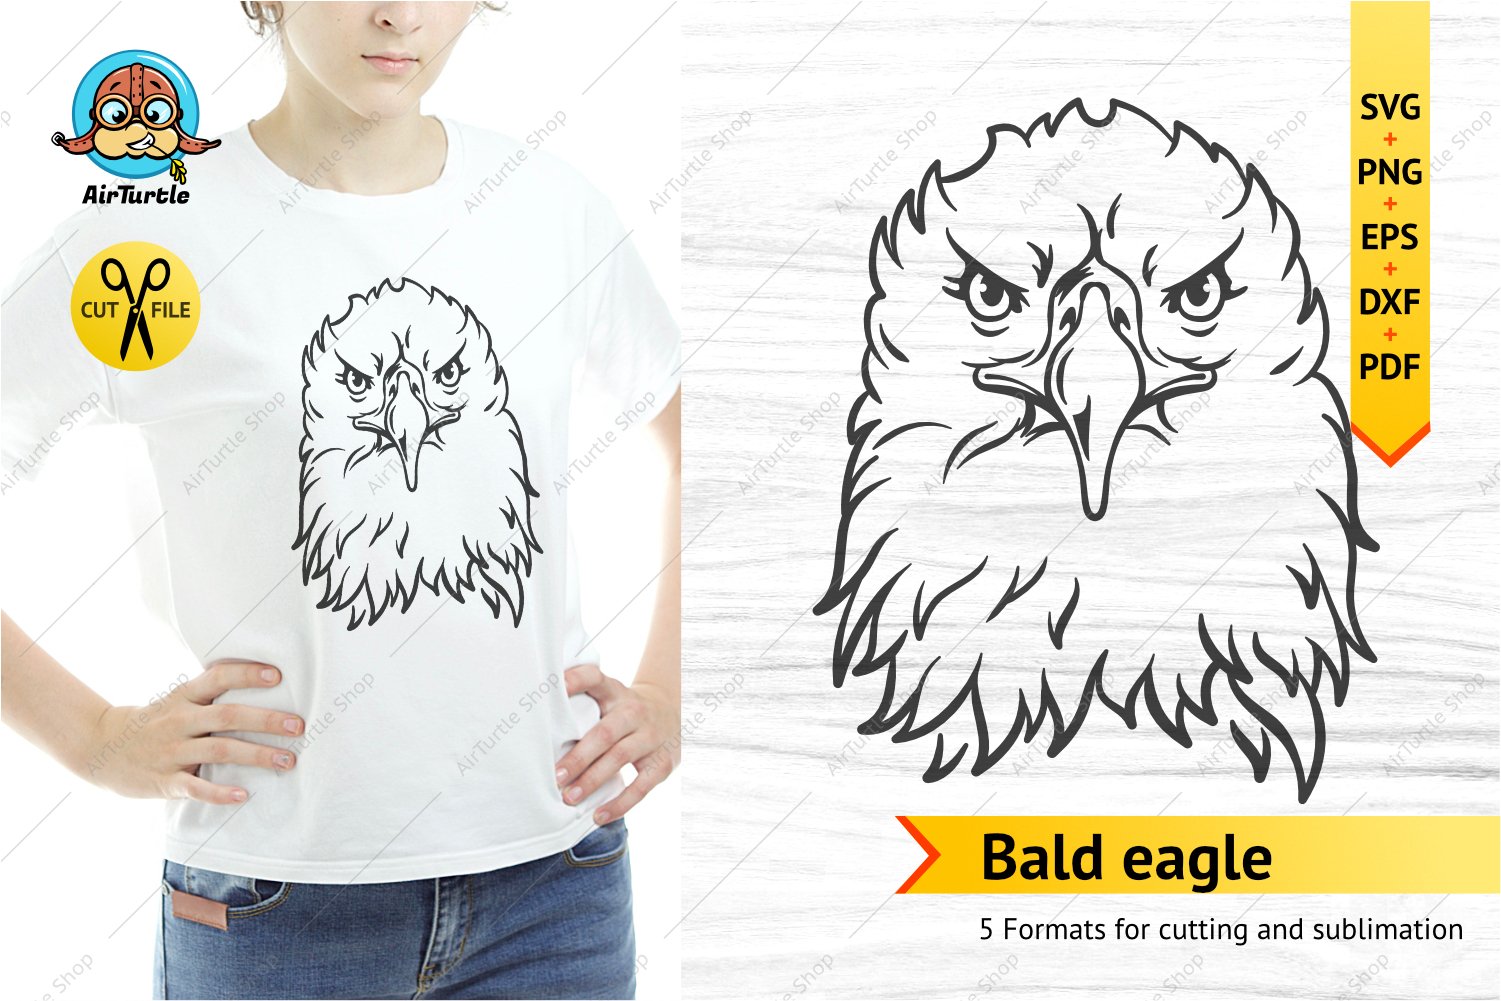 Preview bald eagle svg clipart with tshirt design.